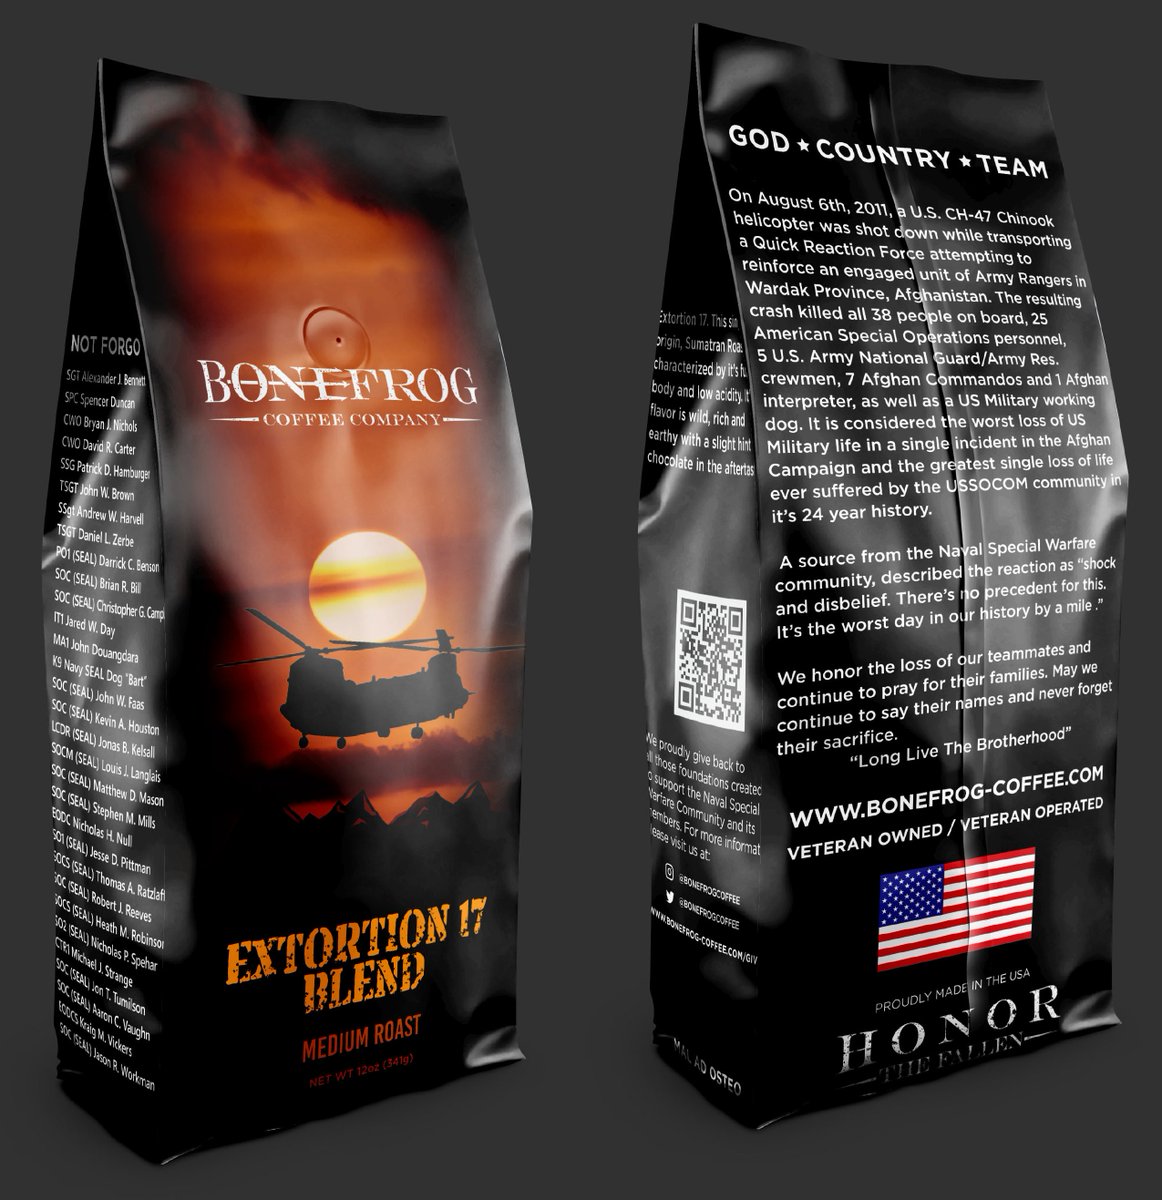 Join us in commemorating their legacy on August 6th and reserve your bag of Extortion 17 blend today at bonefrogcoffee.com. Let's raise our cups together to remember those brave Americans who gave everything for our freedom.
#Extortion17Blend #BonefrogCoffee #HonorOurFallen